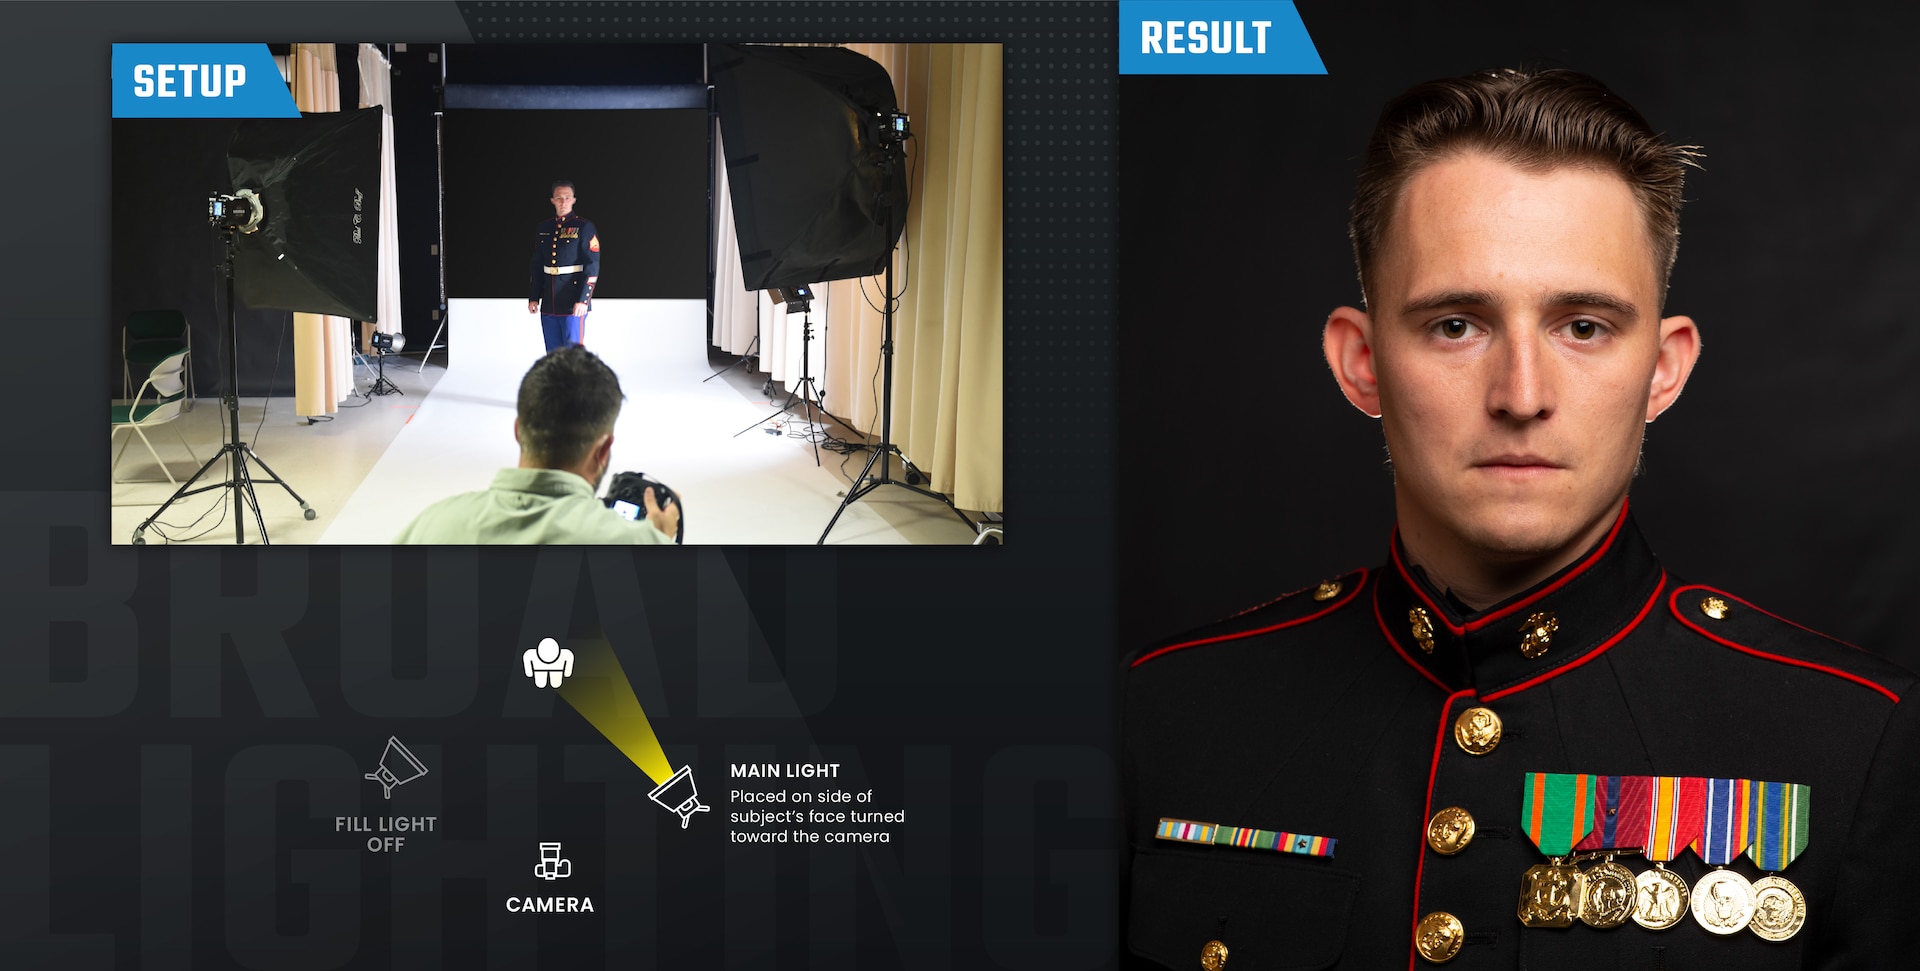 Infographic that demonstrates the Broad lighting setup in three ways: an image of the photographer and subject during the shot, the resulting photo of the subject and an overhead view sketch of the setup.